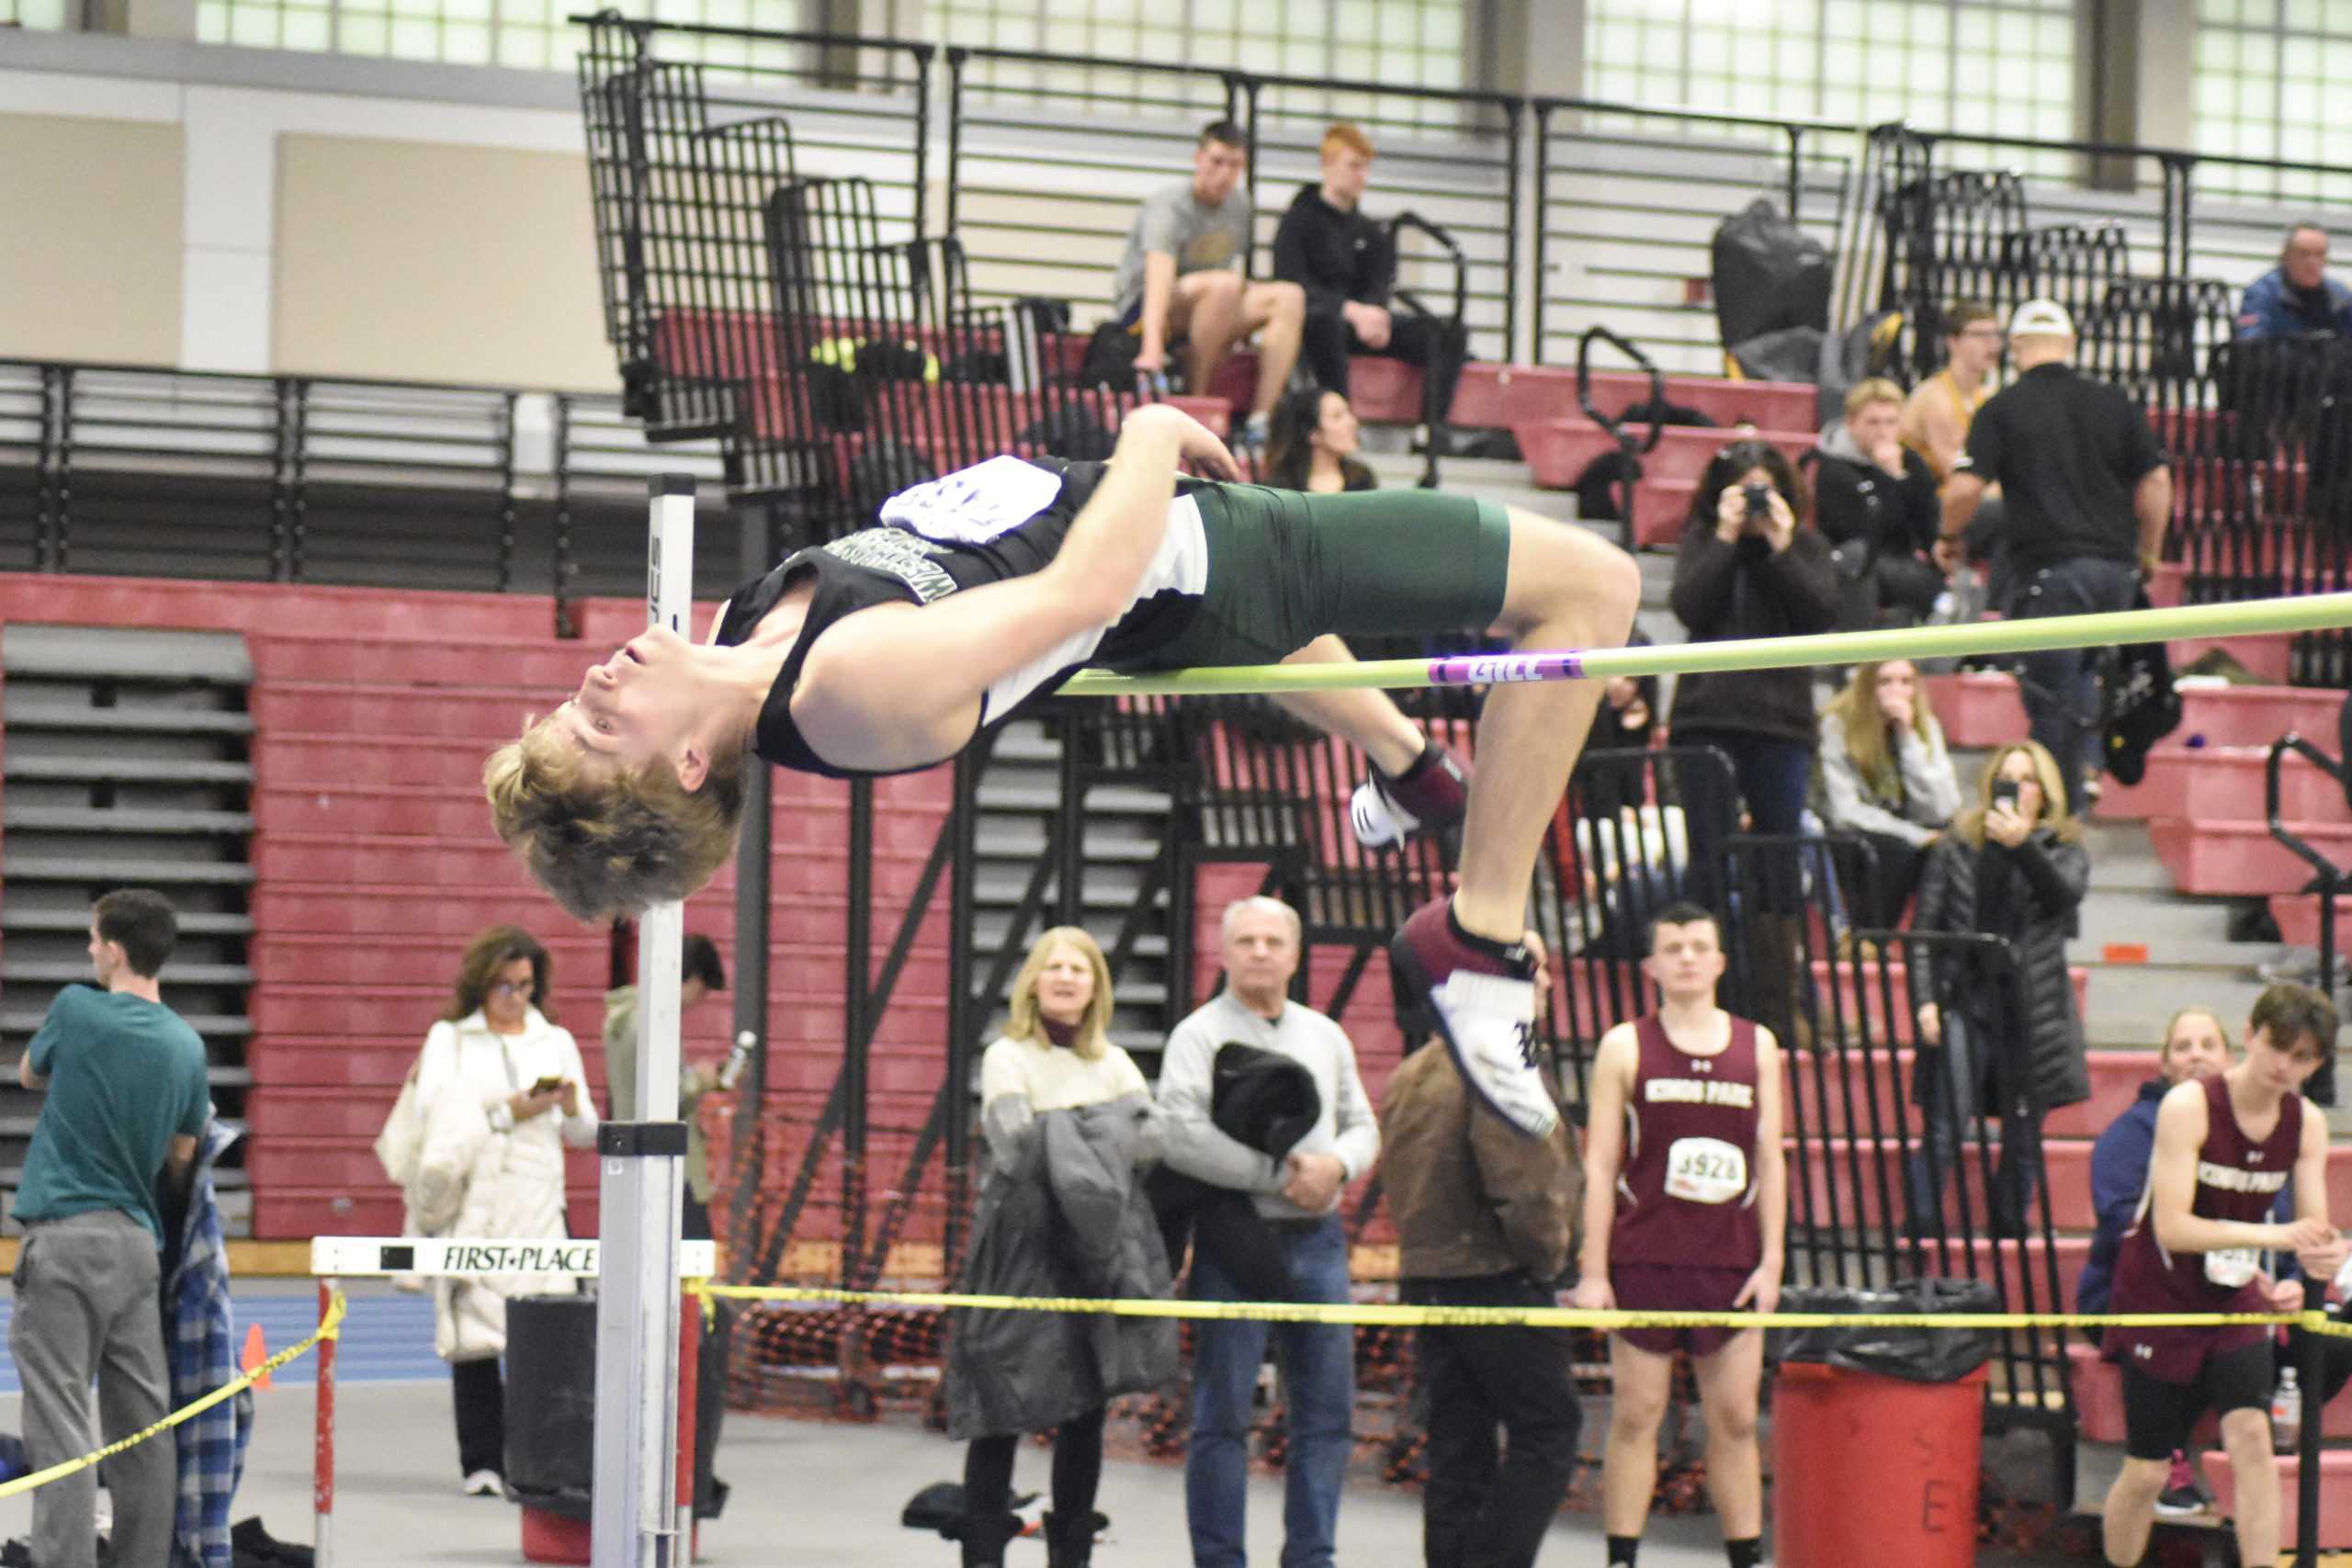 Westhampton Beach senior Jack Meigel settled for second place in the high jump.